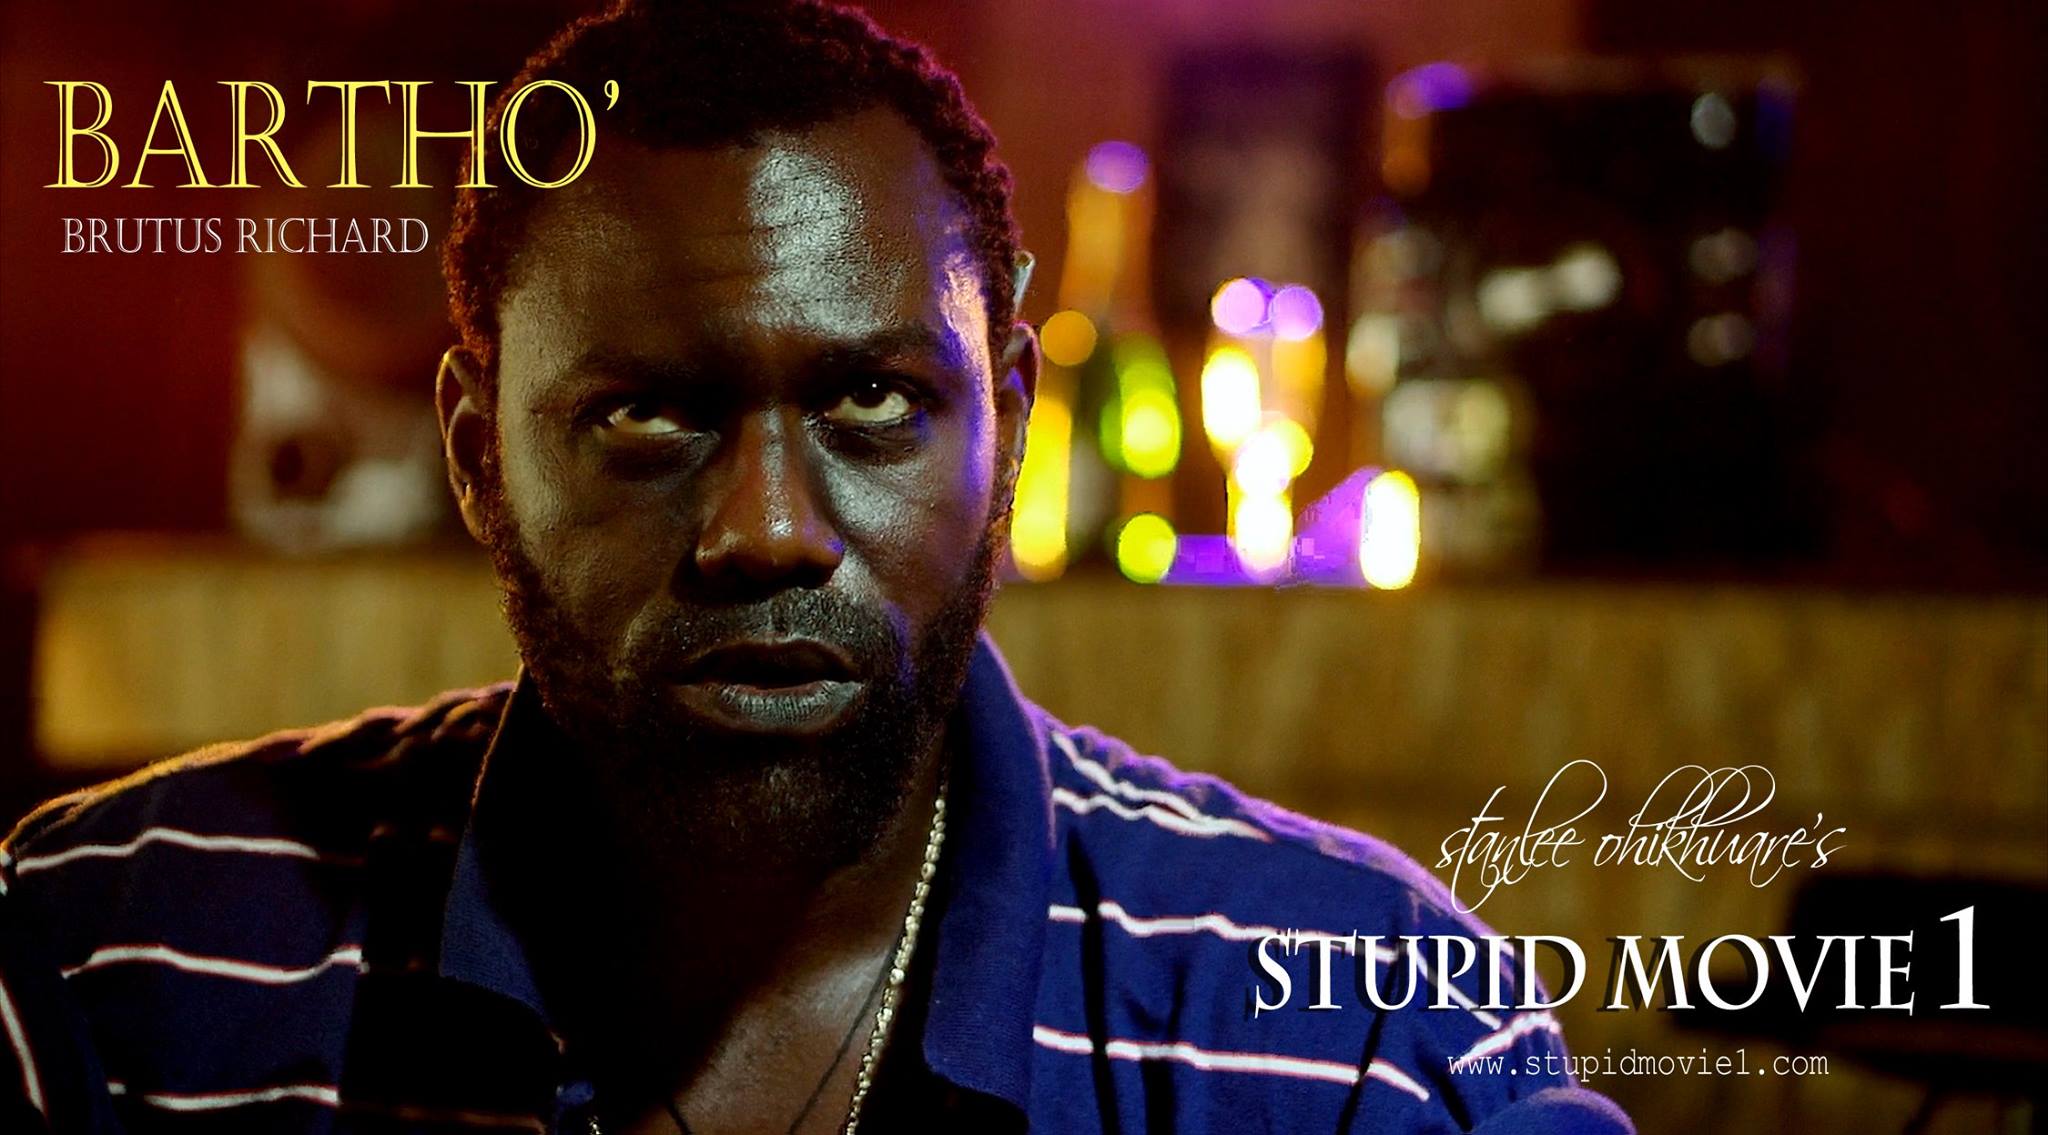 CHARACTER POSTER (BARTHO - Brutus Richard) for Stanlee Ohikhuare's STUPID MOVIE 1